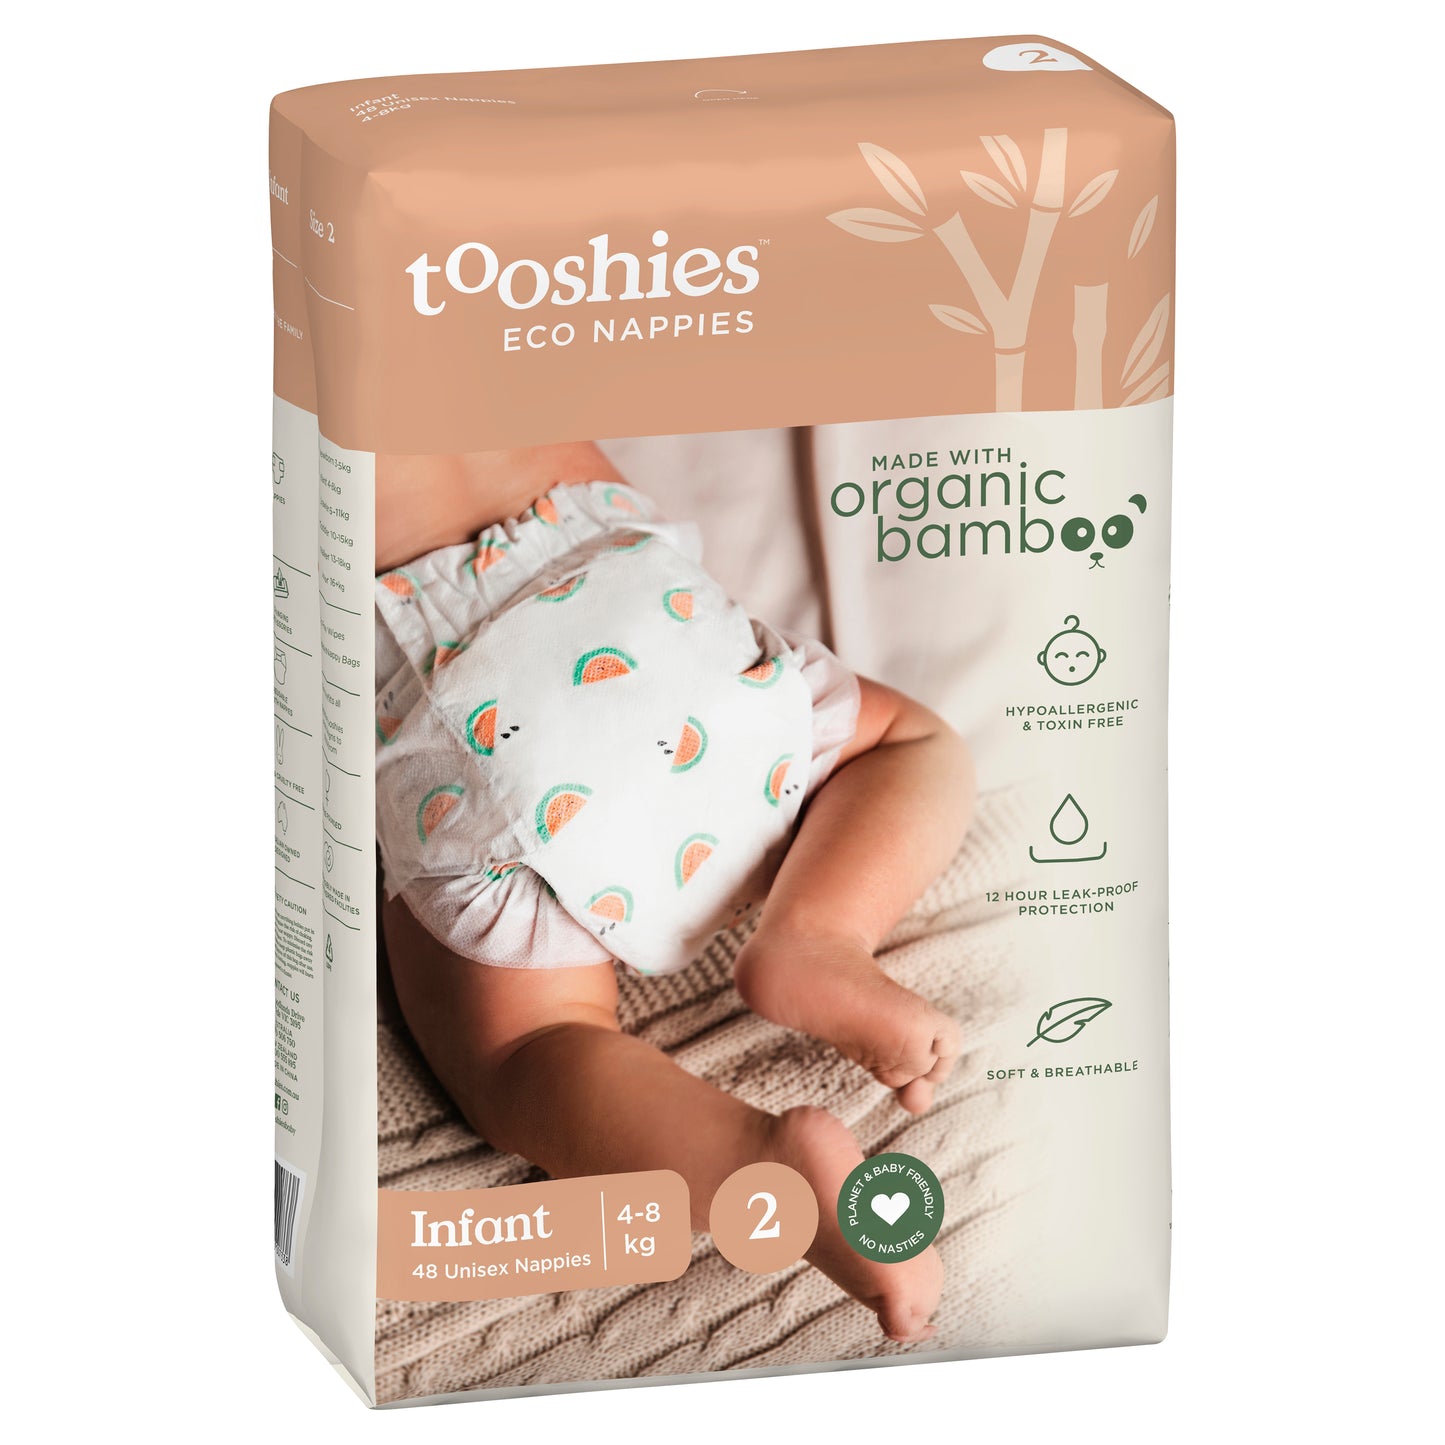 Tooshies Organic Bamboo Nappies - Size 2 Infant 4-8 kg - 48 pk